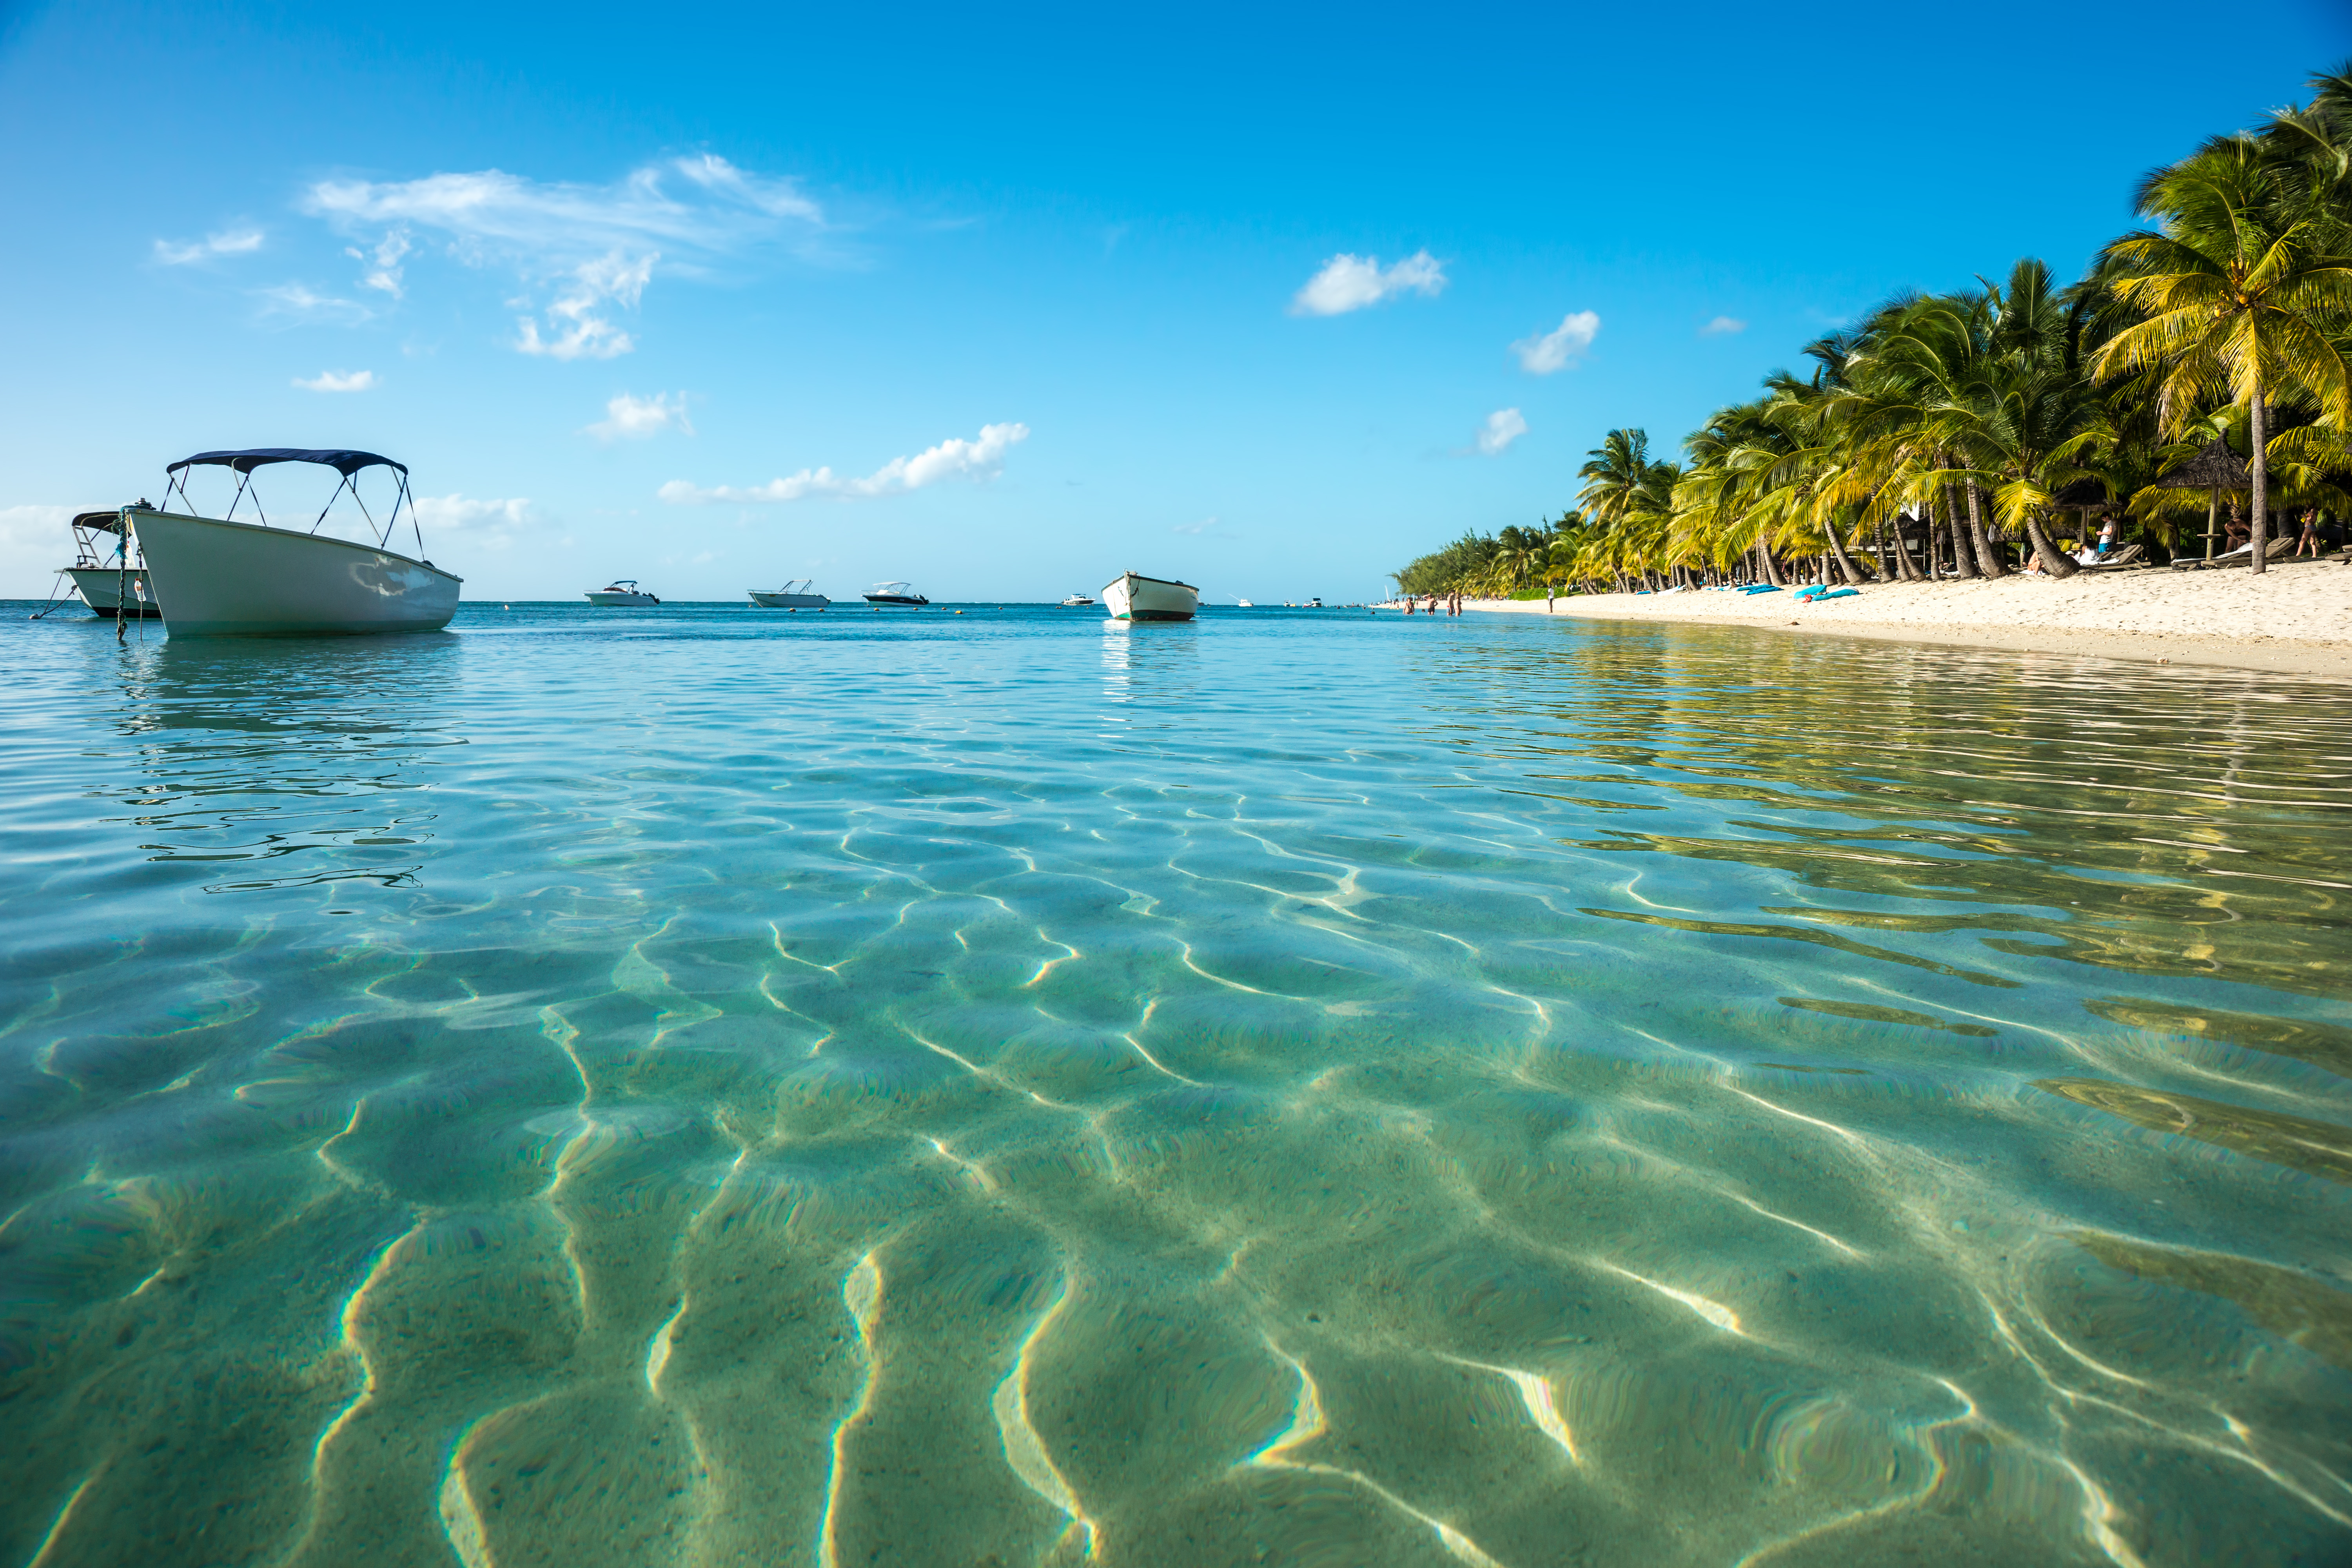 5 Things You Must Do During Your Next Trip to Belize